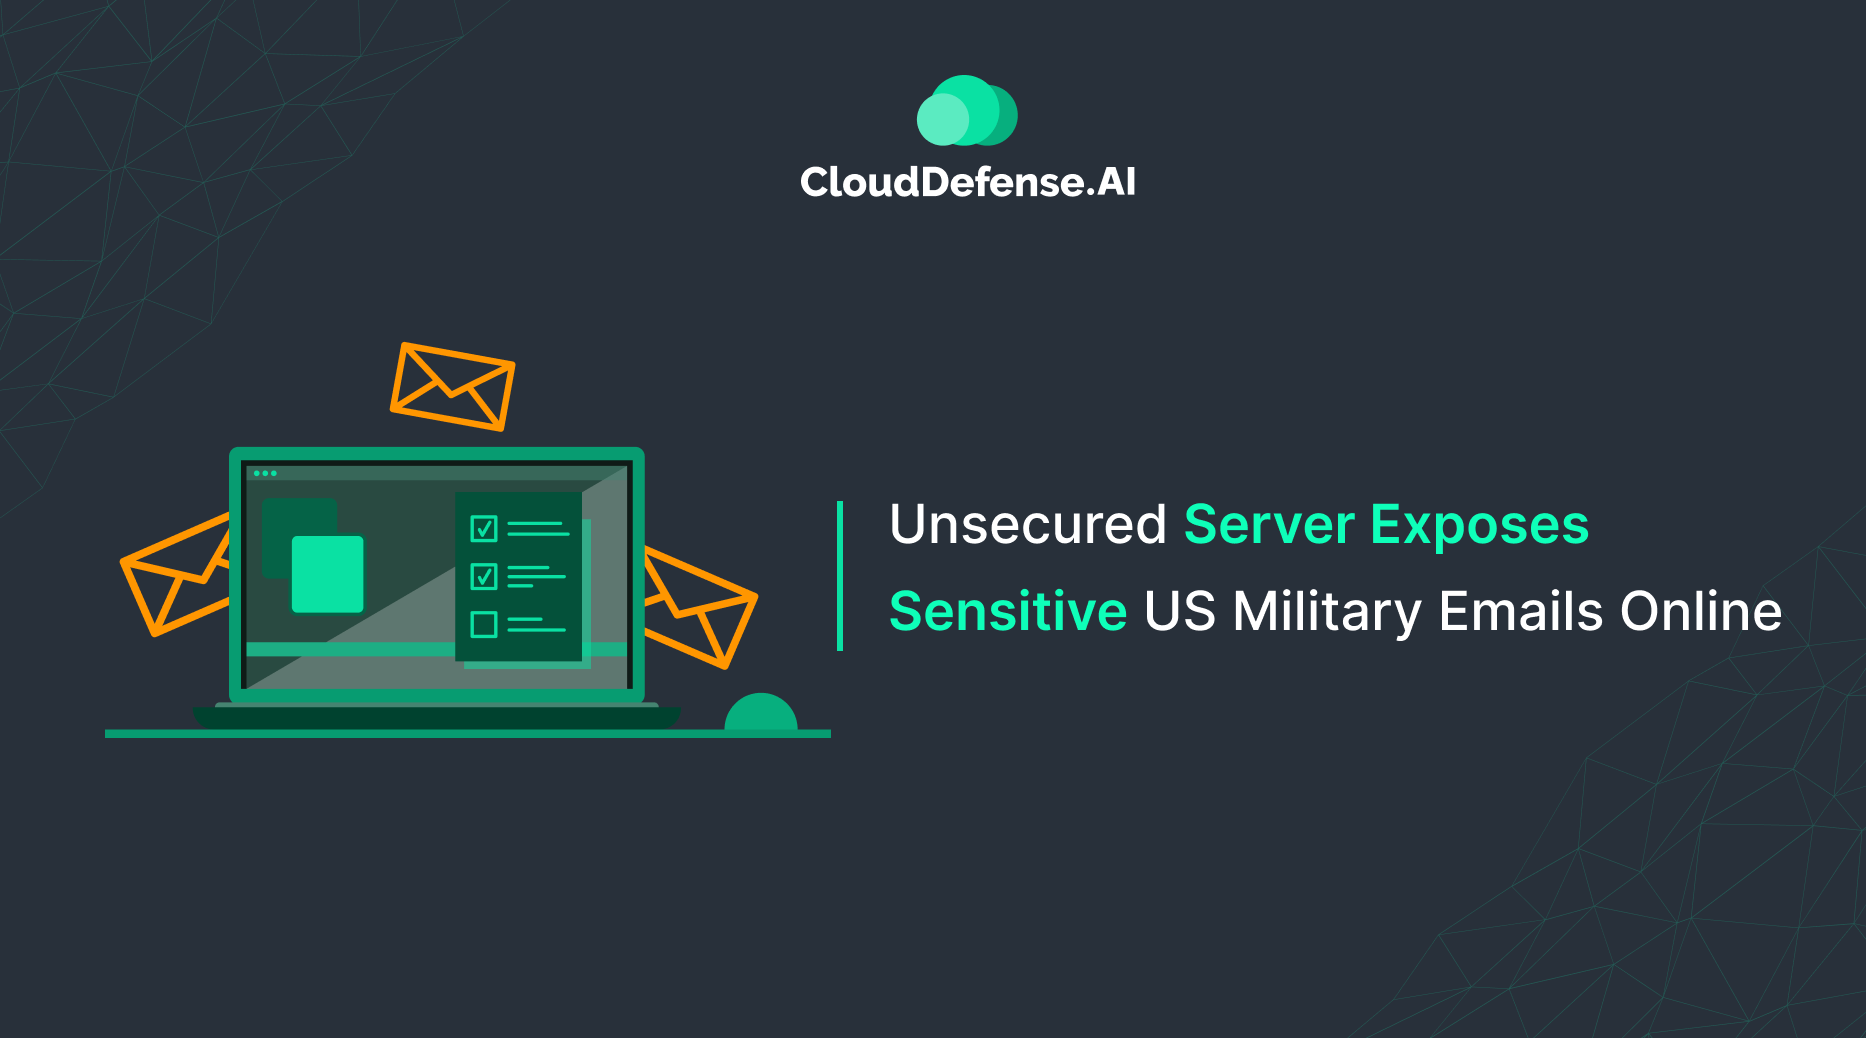 Unsecured Server Exposes Sensitive US Military Emails Online